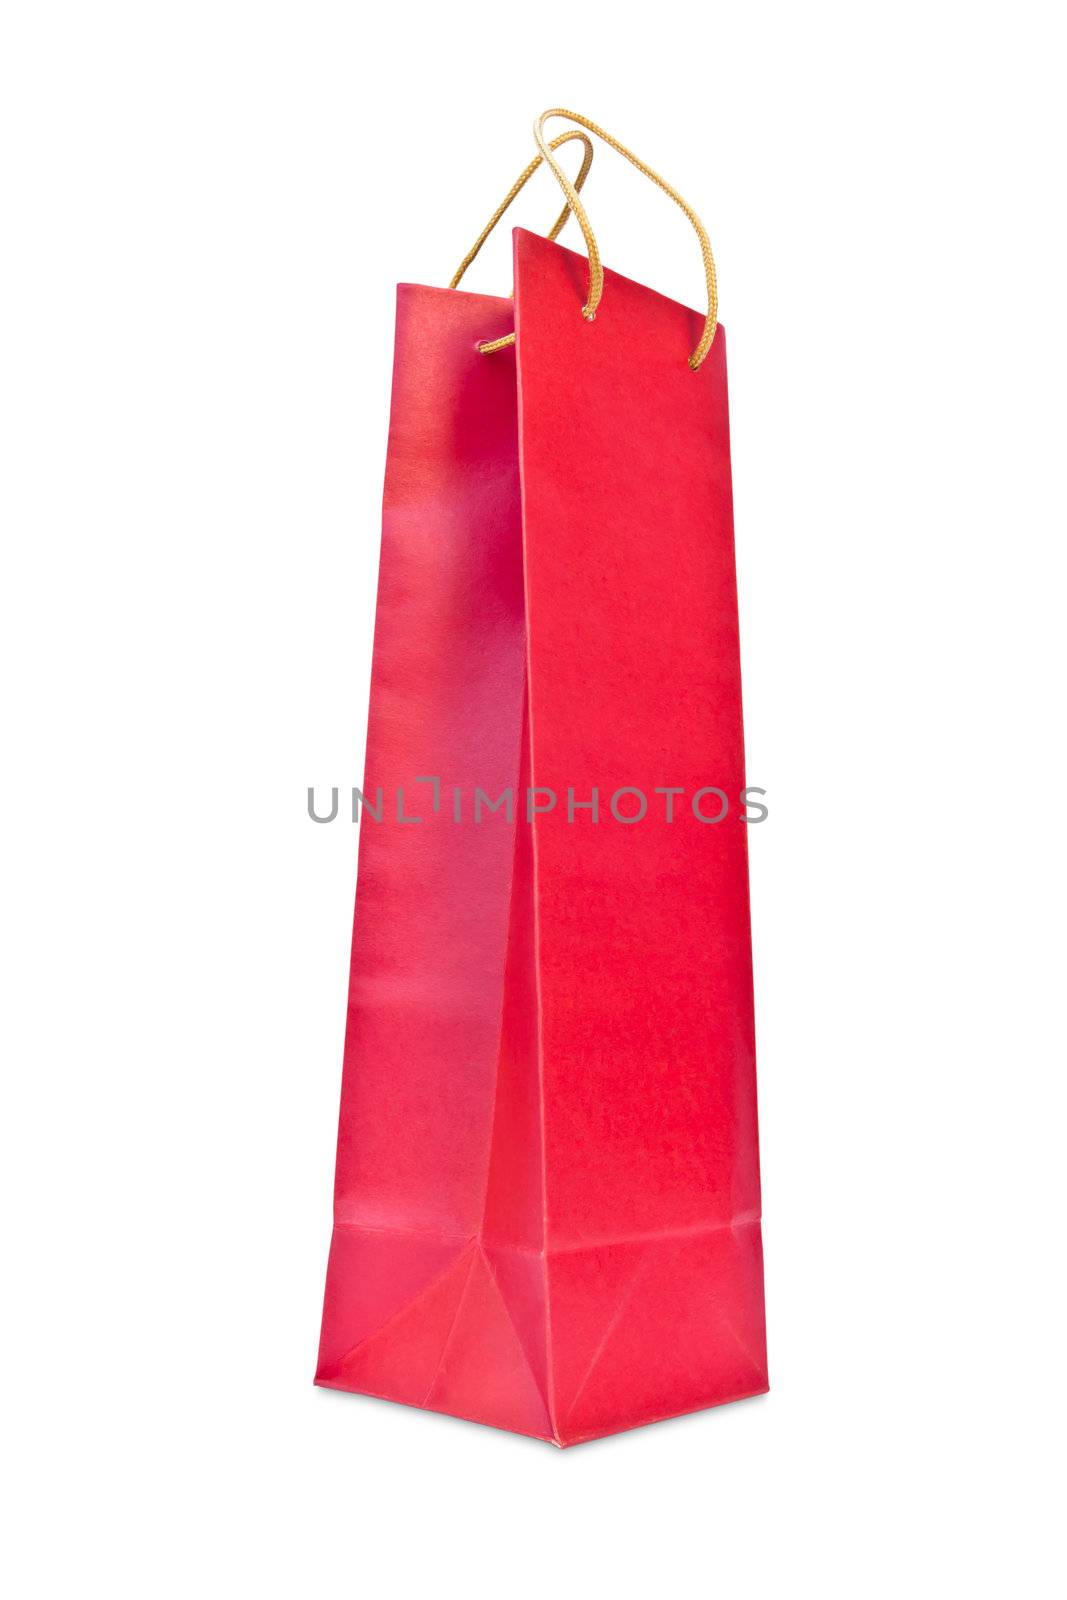 wine red paper bag isolated by tungphoto